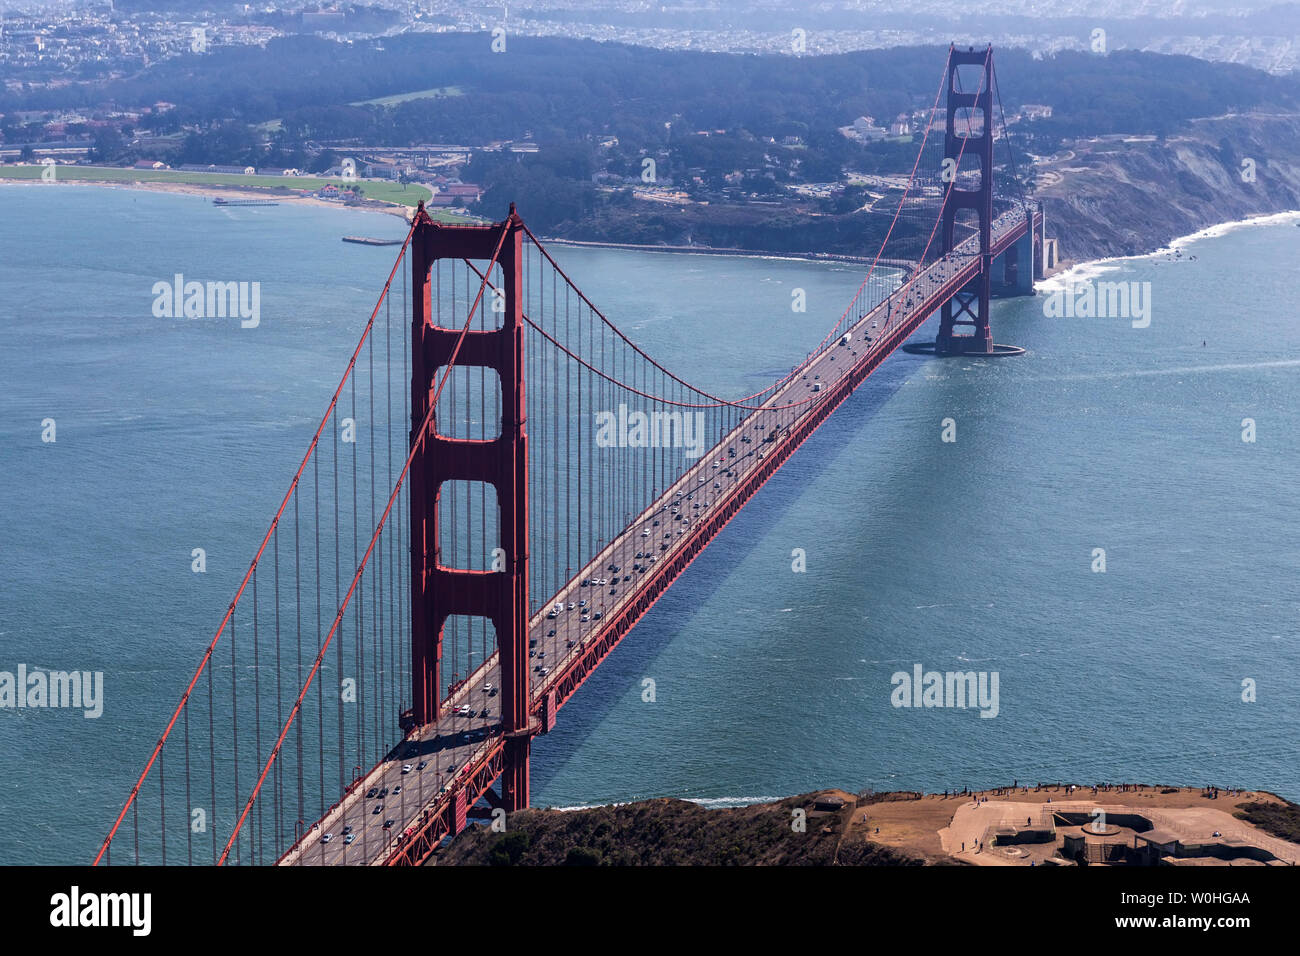 Aerial view of the Golden Gate Bridge and San Francisco Bay on the scenic California coast. Stock Photo